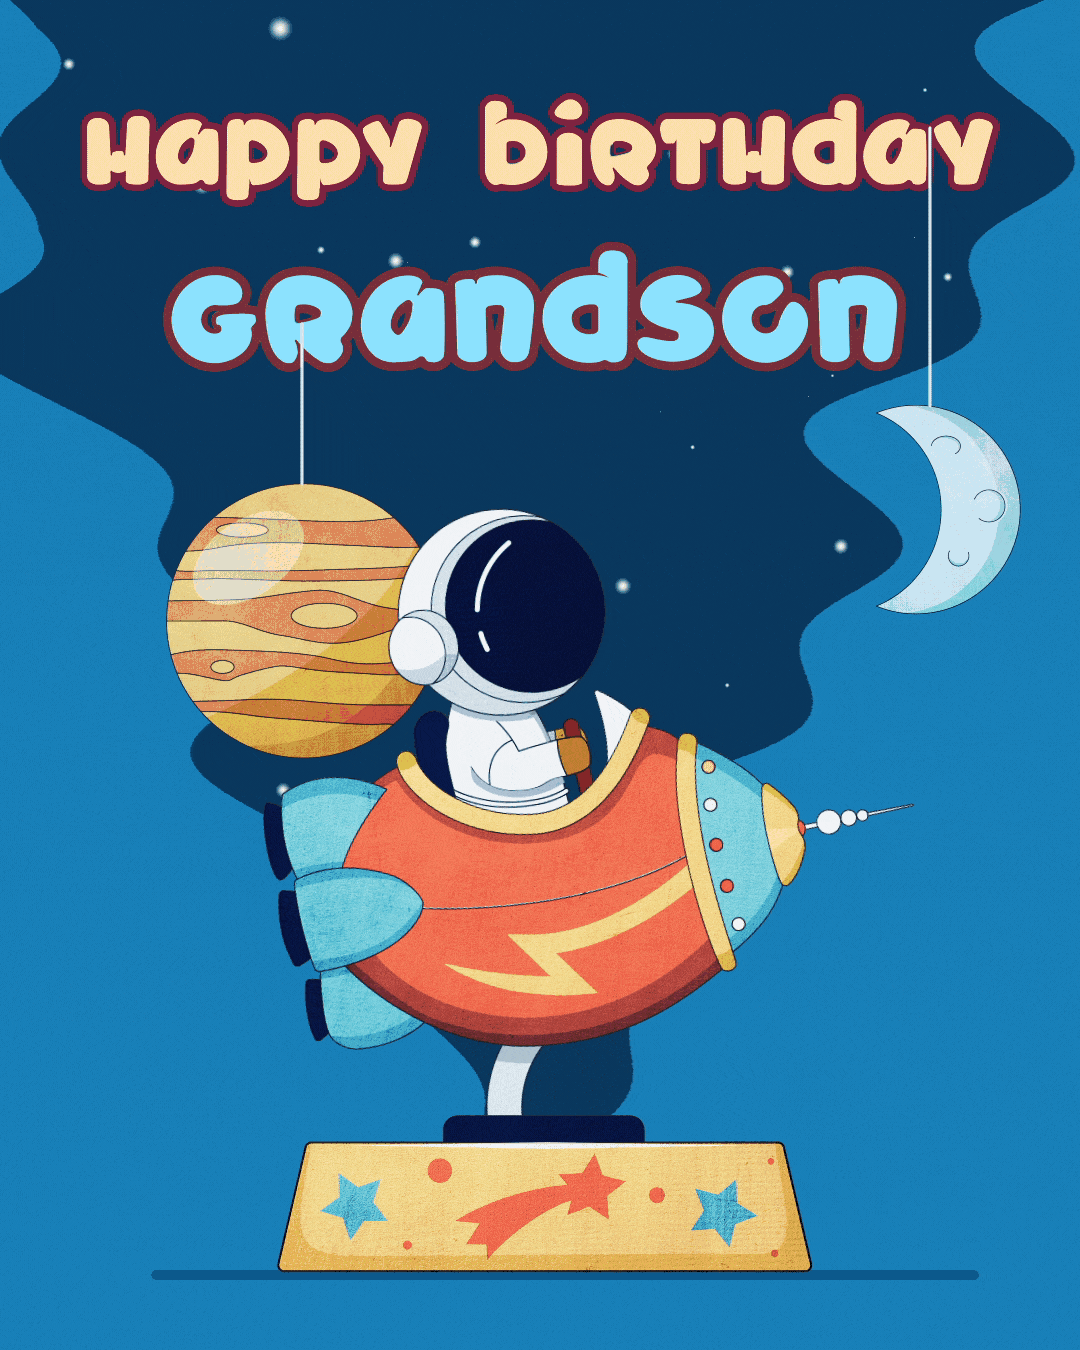 Free Happy Birthday Animated Images and GIFs for Grandson ...